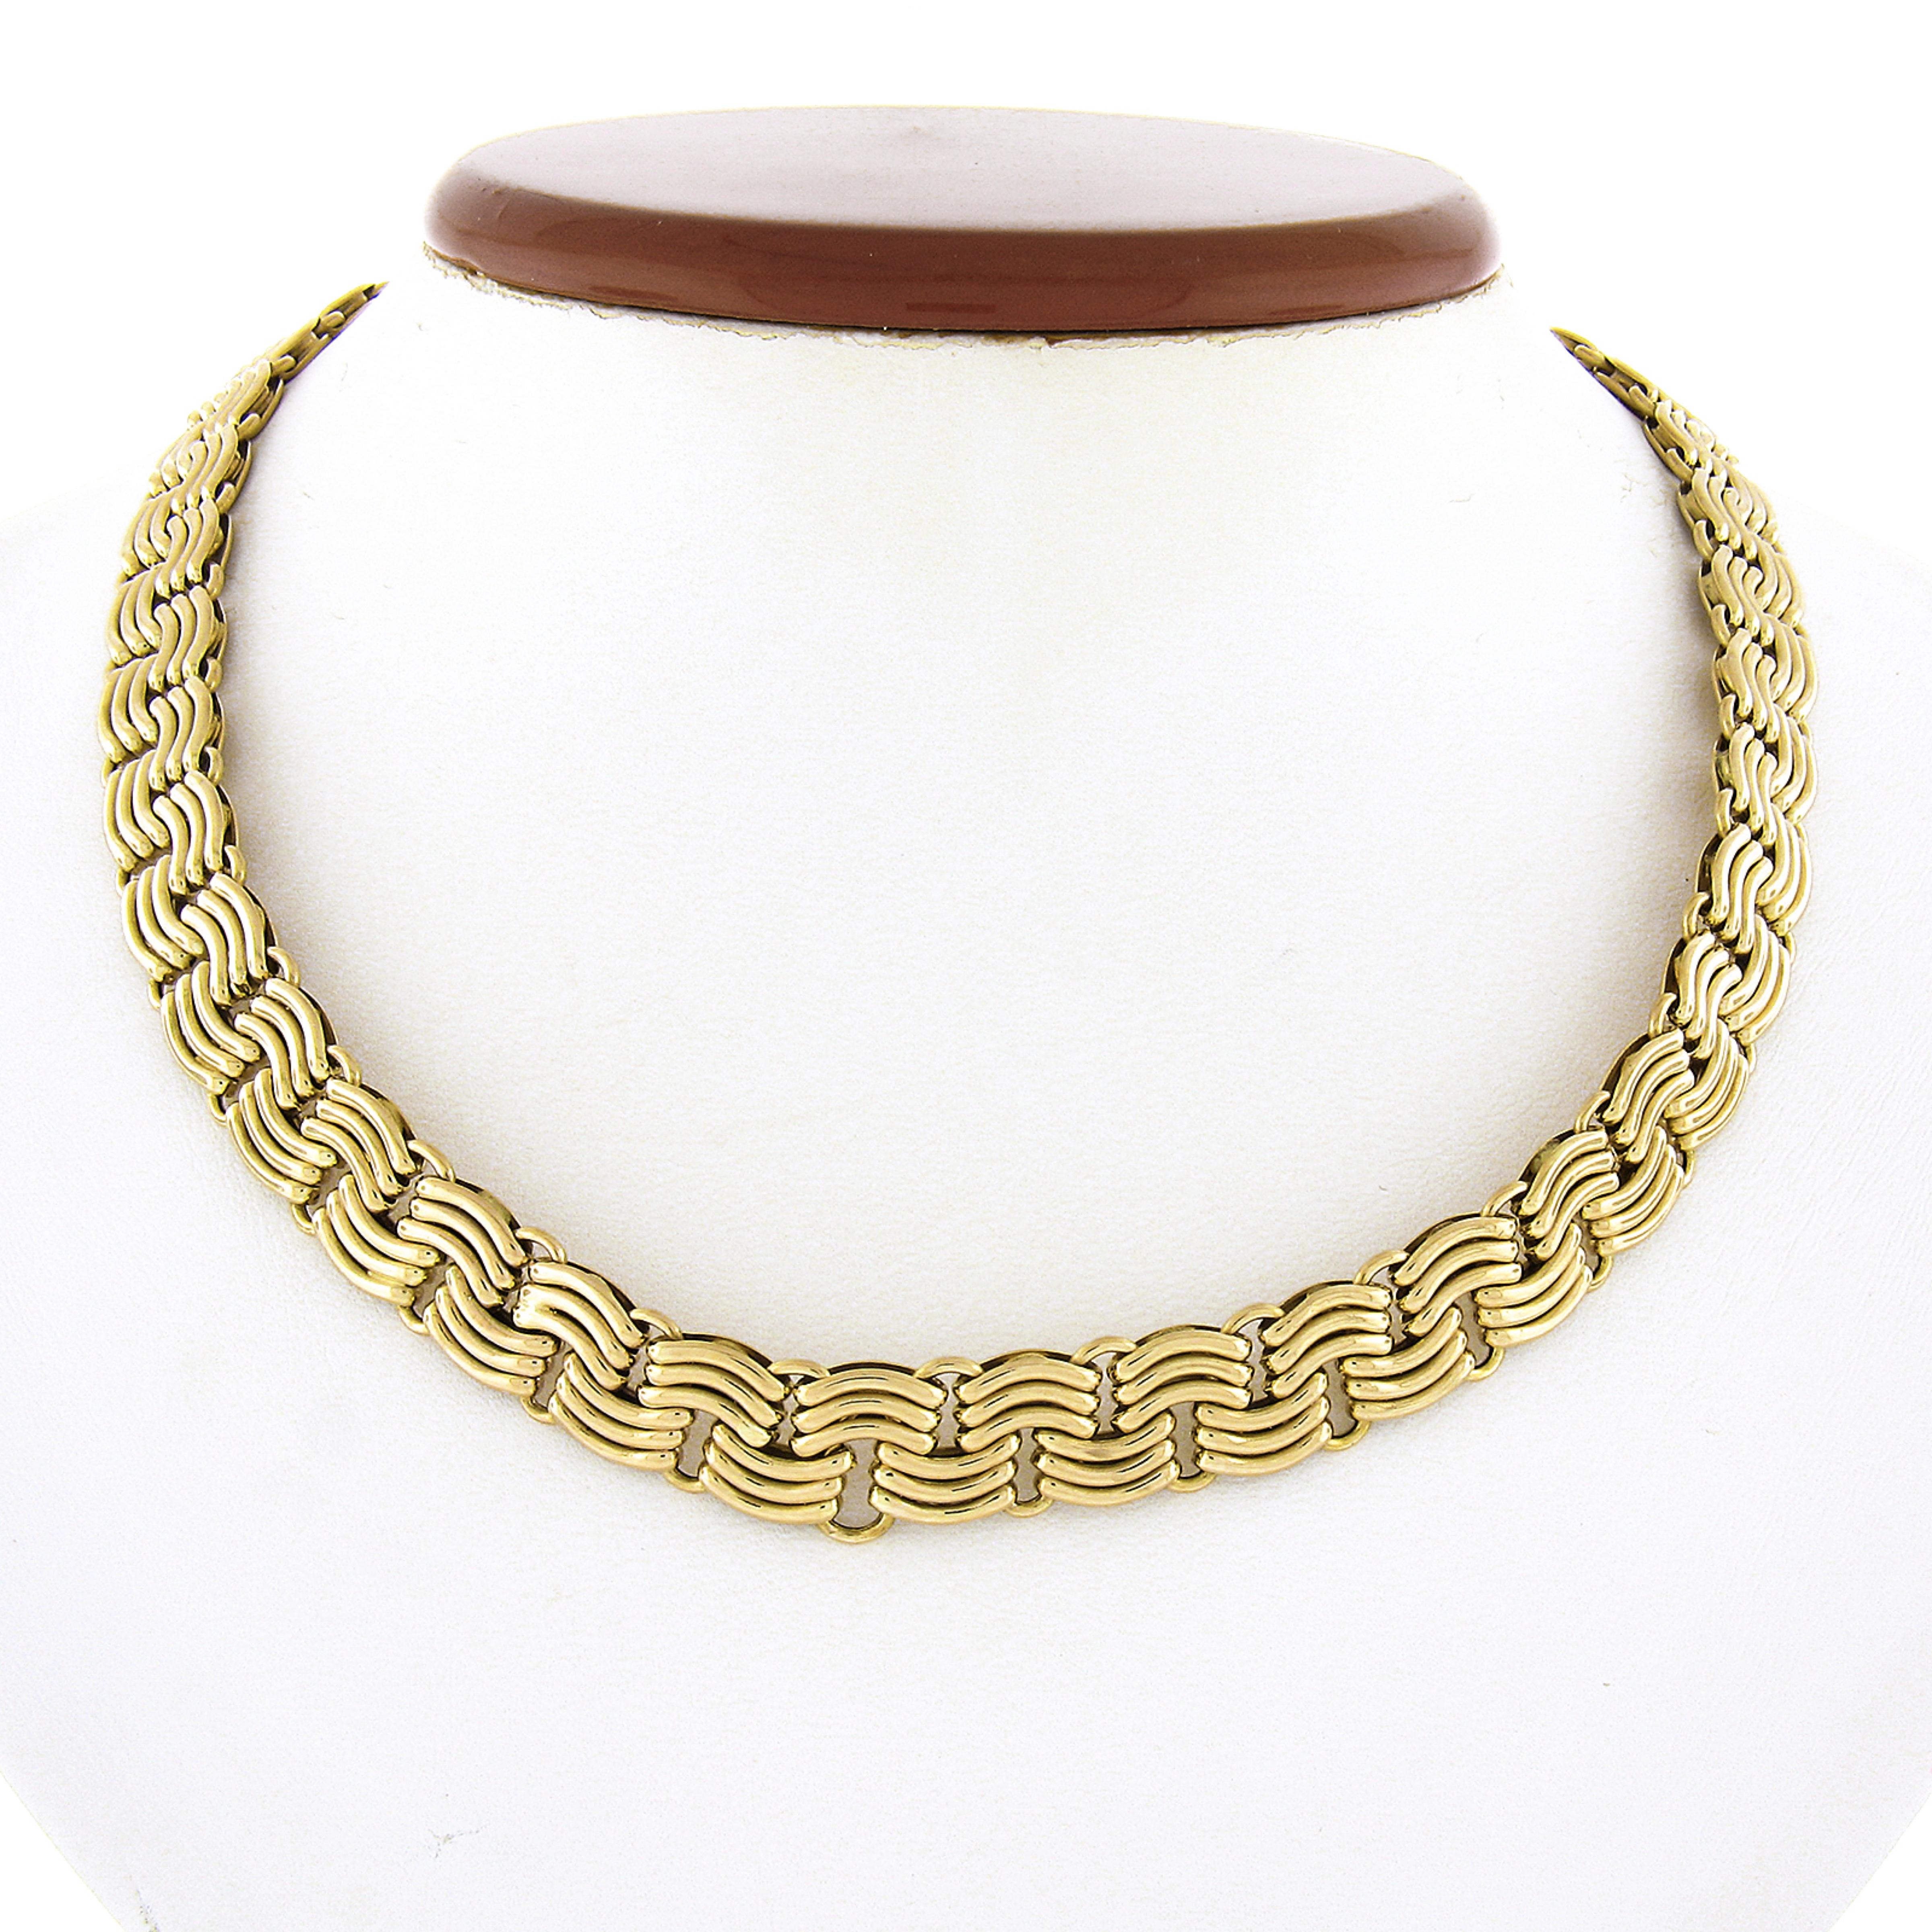 This gorgeous chain necklace was crafted in solid 14k yellow gold by UNOAERRE Italy. It features a unique and fancy polished braided flat link design. The link have a beautiful hallowed design which gives the necklace its rich and bold look. It is